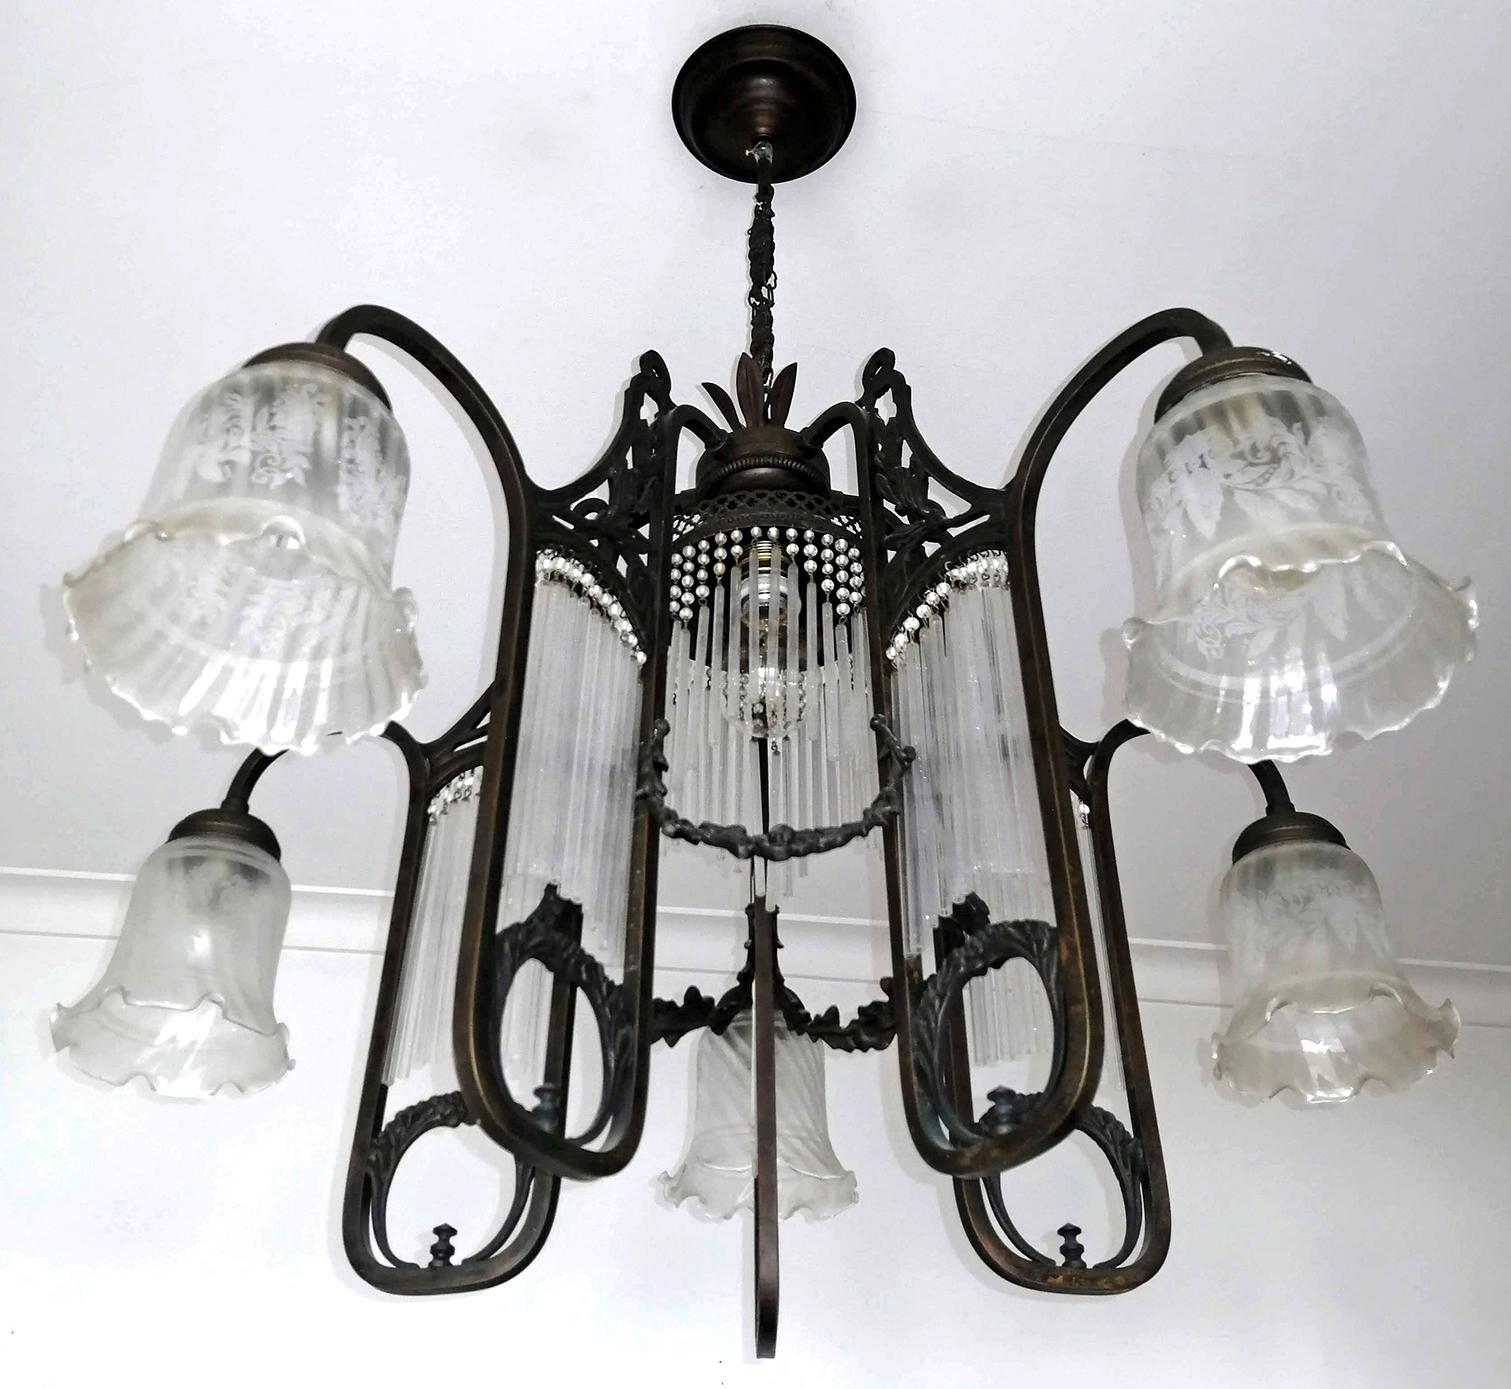 Ornate French Art Nouveau and Art Deco, frosted satin etched art glass lamp shades chandelier
Measures: 
Diameter 30.7 in/ 78 cm
Height 32.2 in / 82 cm
Weight 7 Kg / 32 lb
6-light bulbs (5-E14 + 1 E.27) Good working condition
Assembly required.